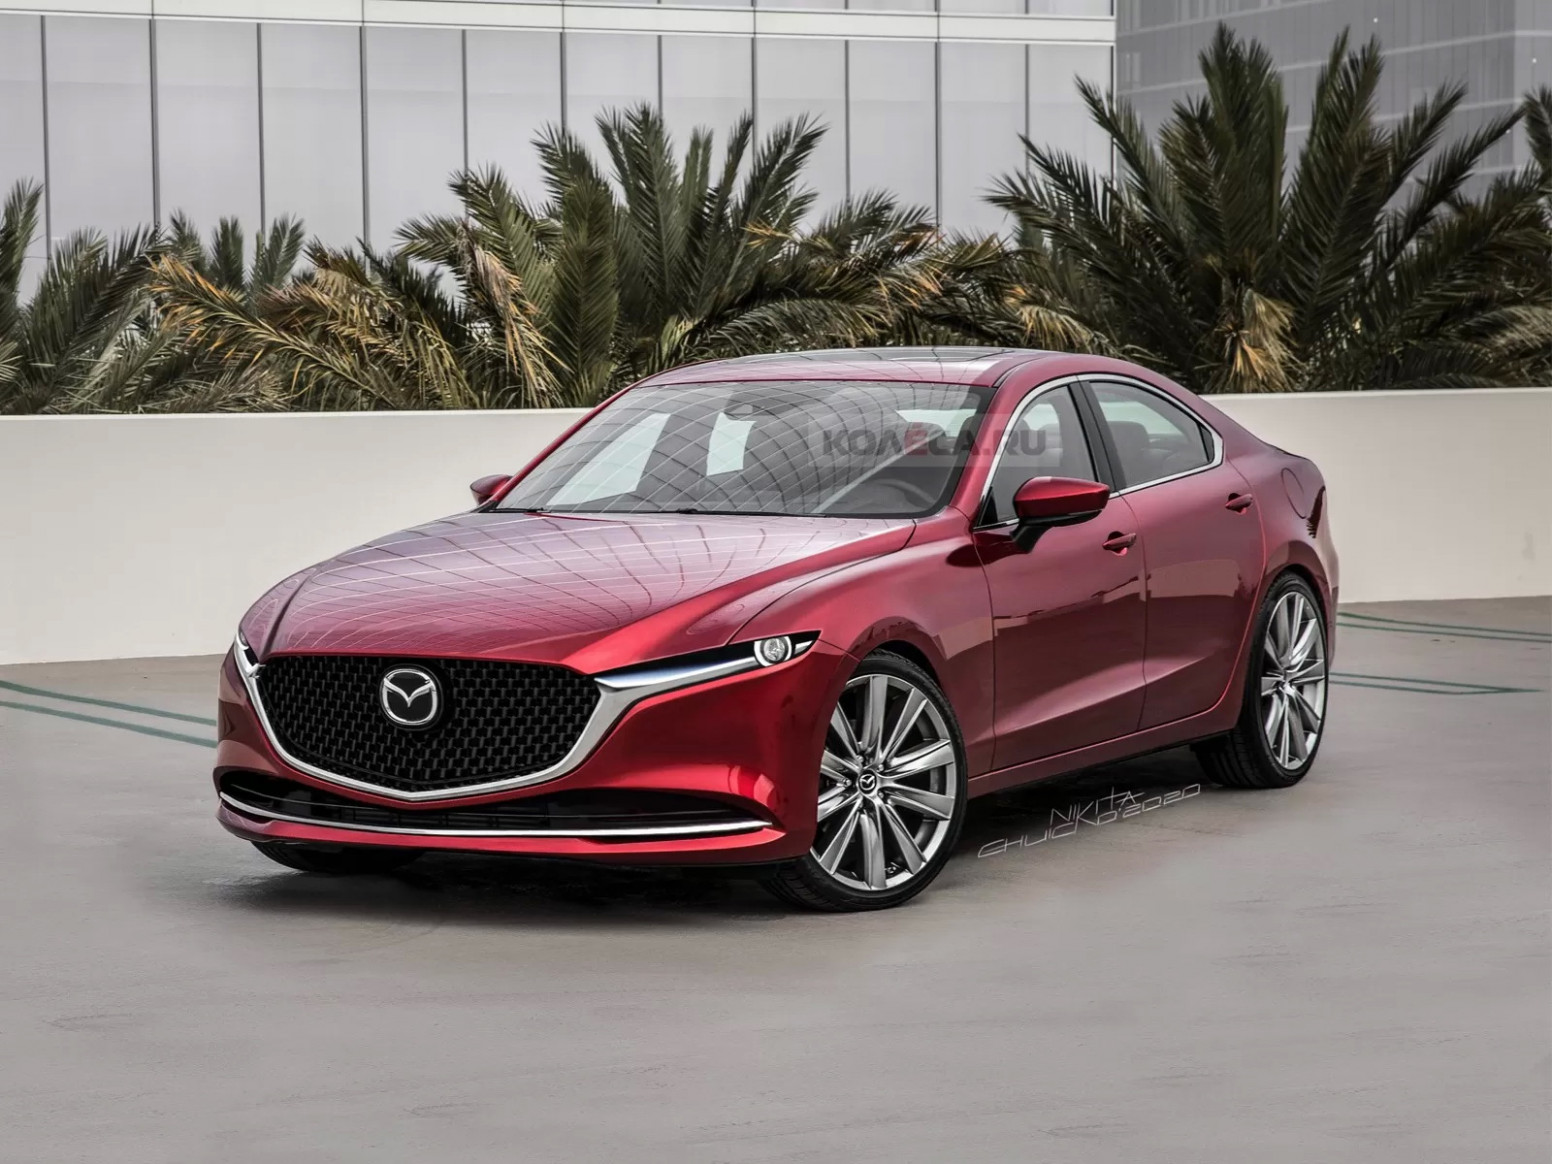 14 Mazda14 RWD Should Resemble The Vision Concept, So Here's A